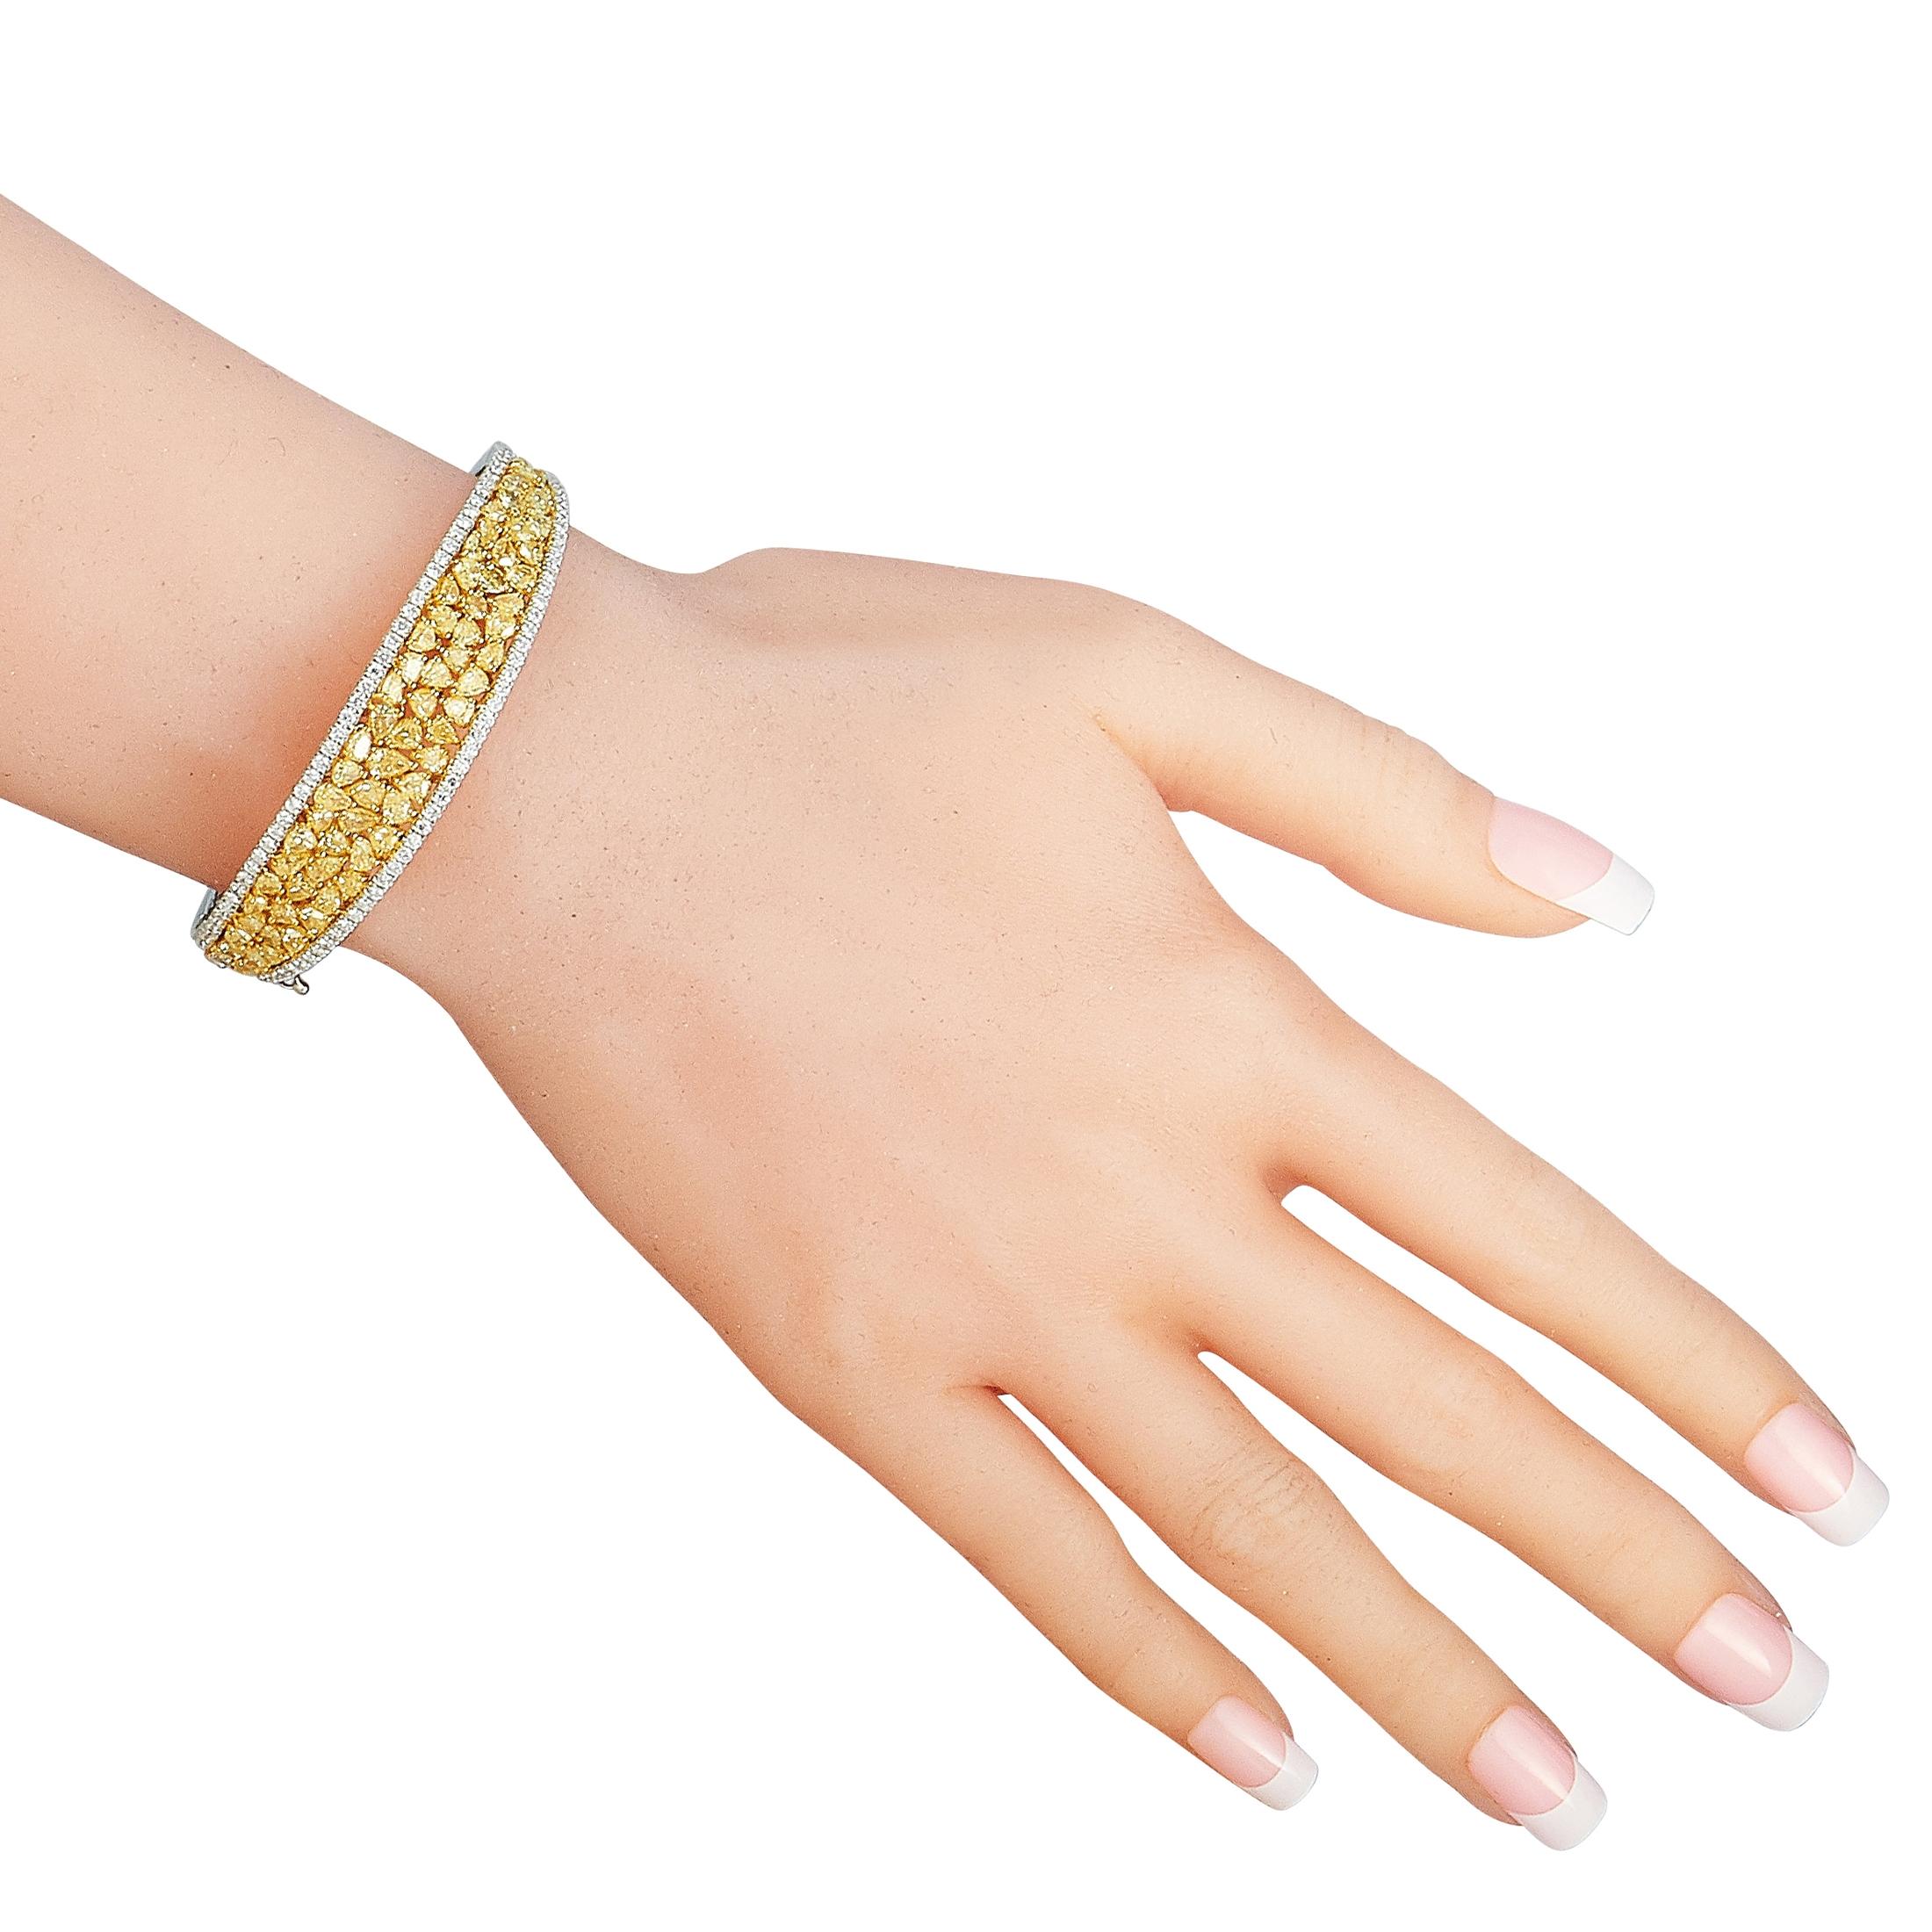 This LB Exclusive bracelet is made of 18K white gold and embellished with white and yellow diamonds that total 1.79 and 9.21 carats respectively. The bracelet weighs 31 grams and measures 7” in length.

Offered in brand new condition, this jewelry